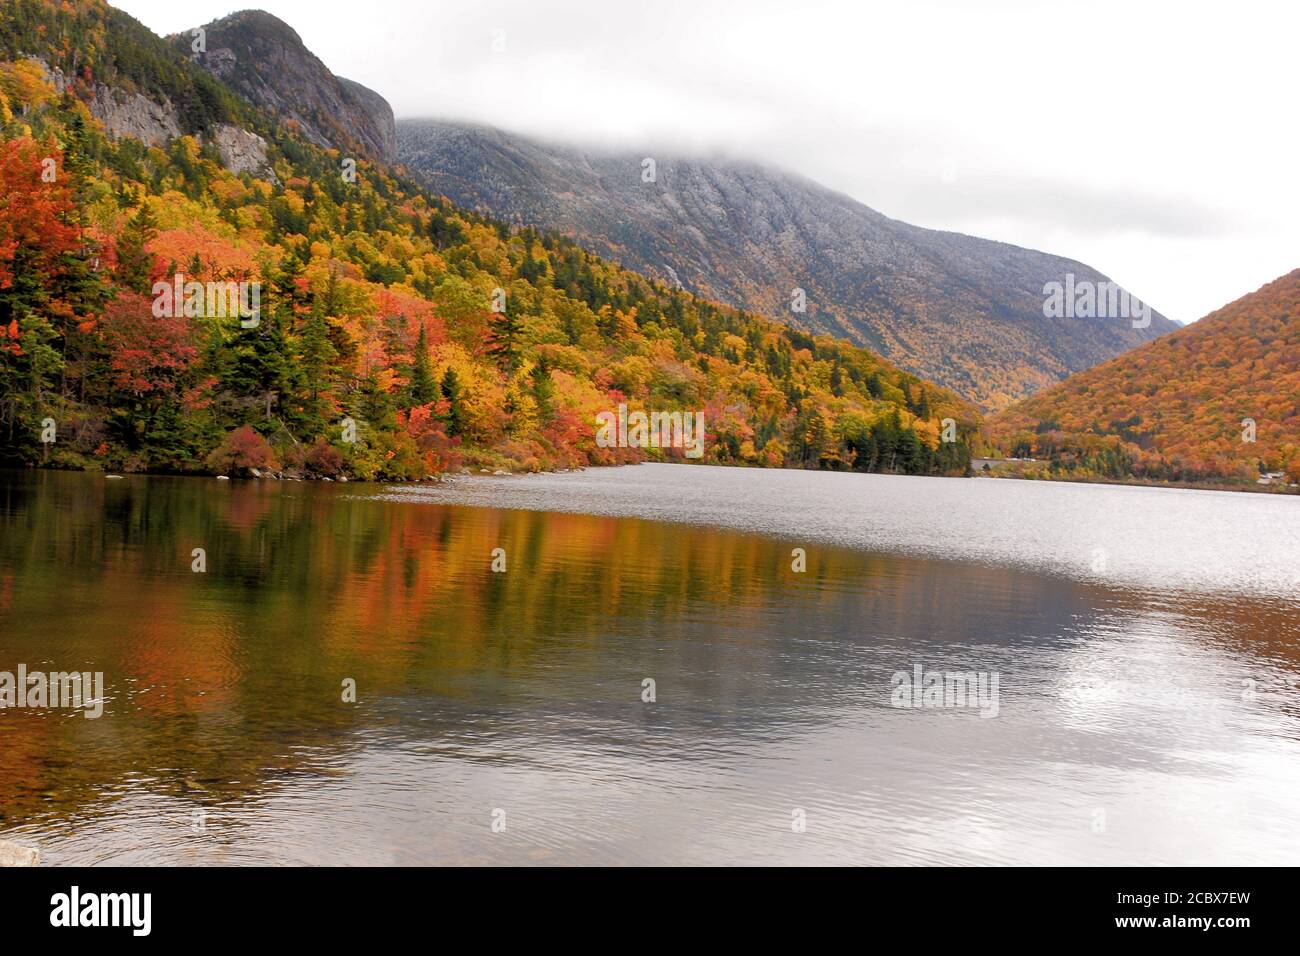 Autumn in White Mountains of New Hampshire. Sweeping view of Franconia Notch and colorful foliage from shore of Echo Lake. Dusting of snow on mountain Stock Photo